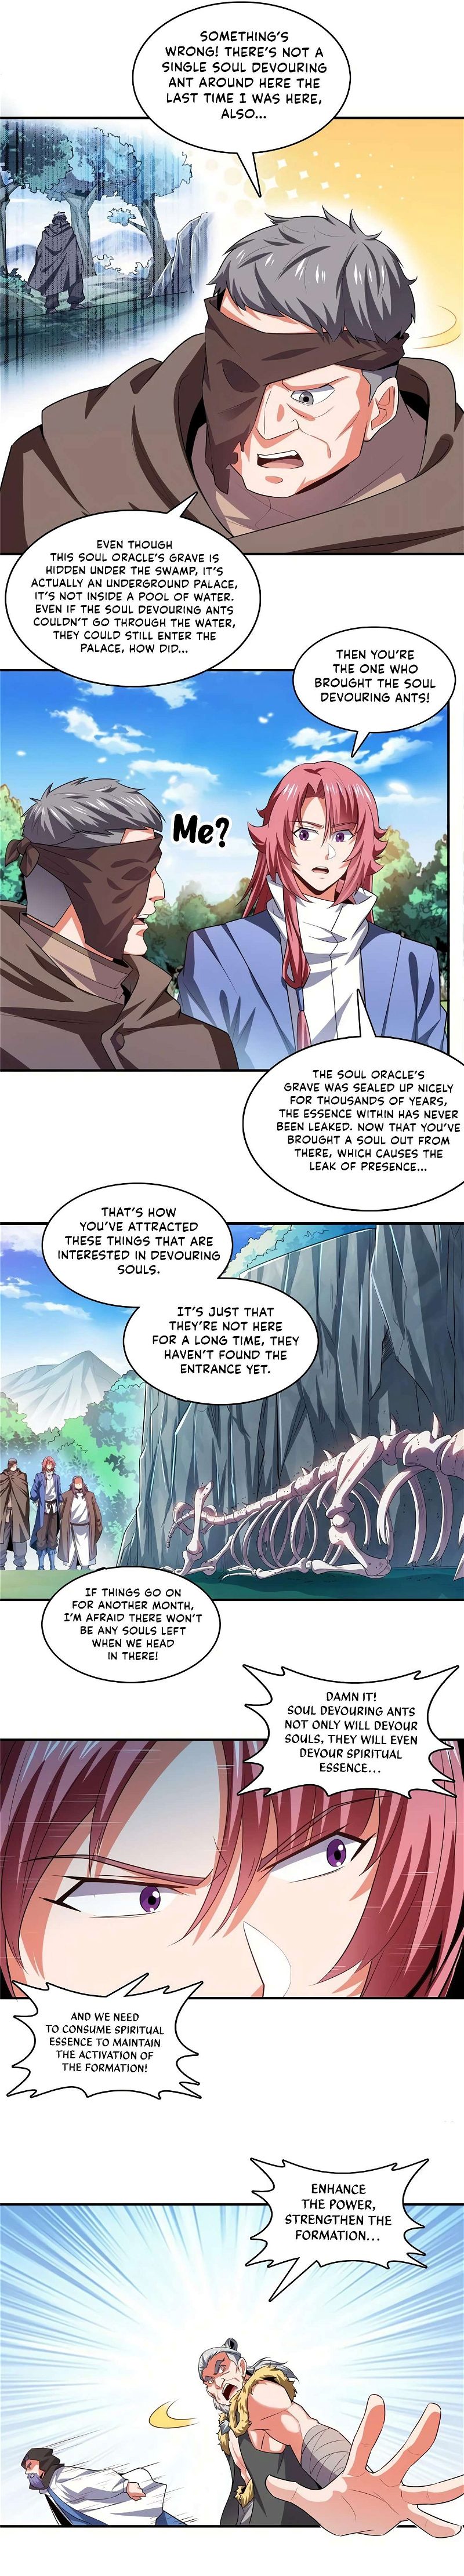 Library of Heaven’s Path Chapter 281 page 8